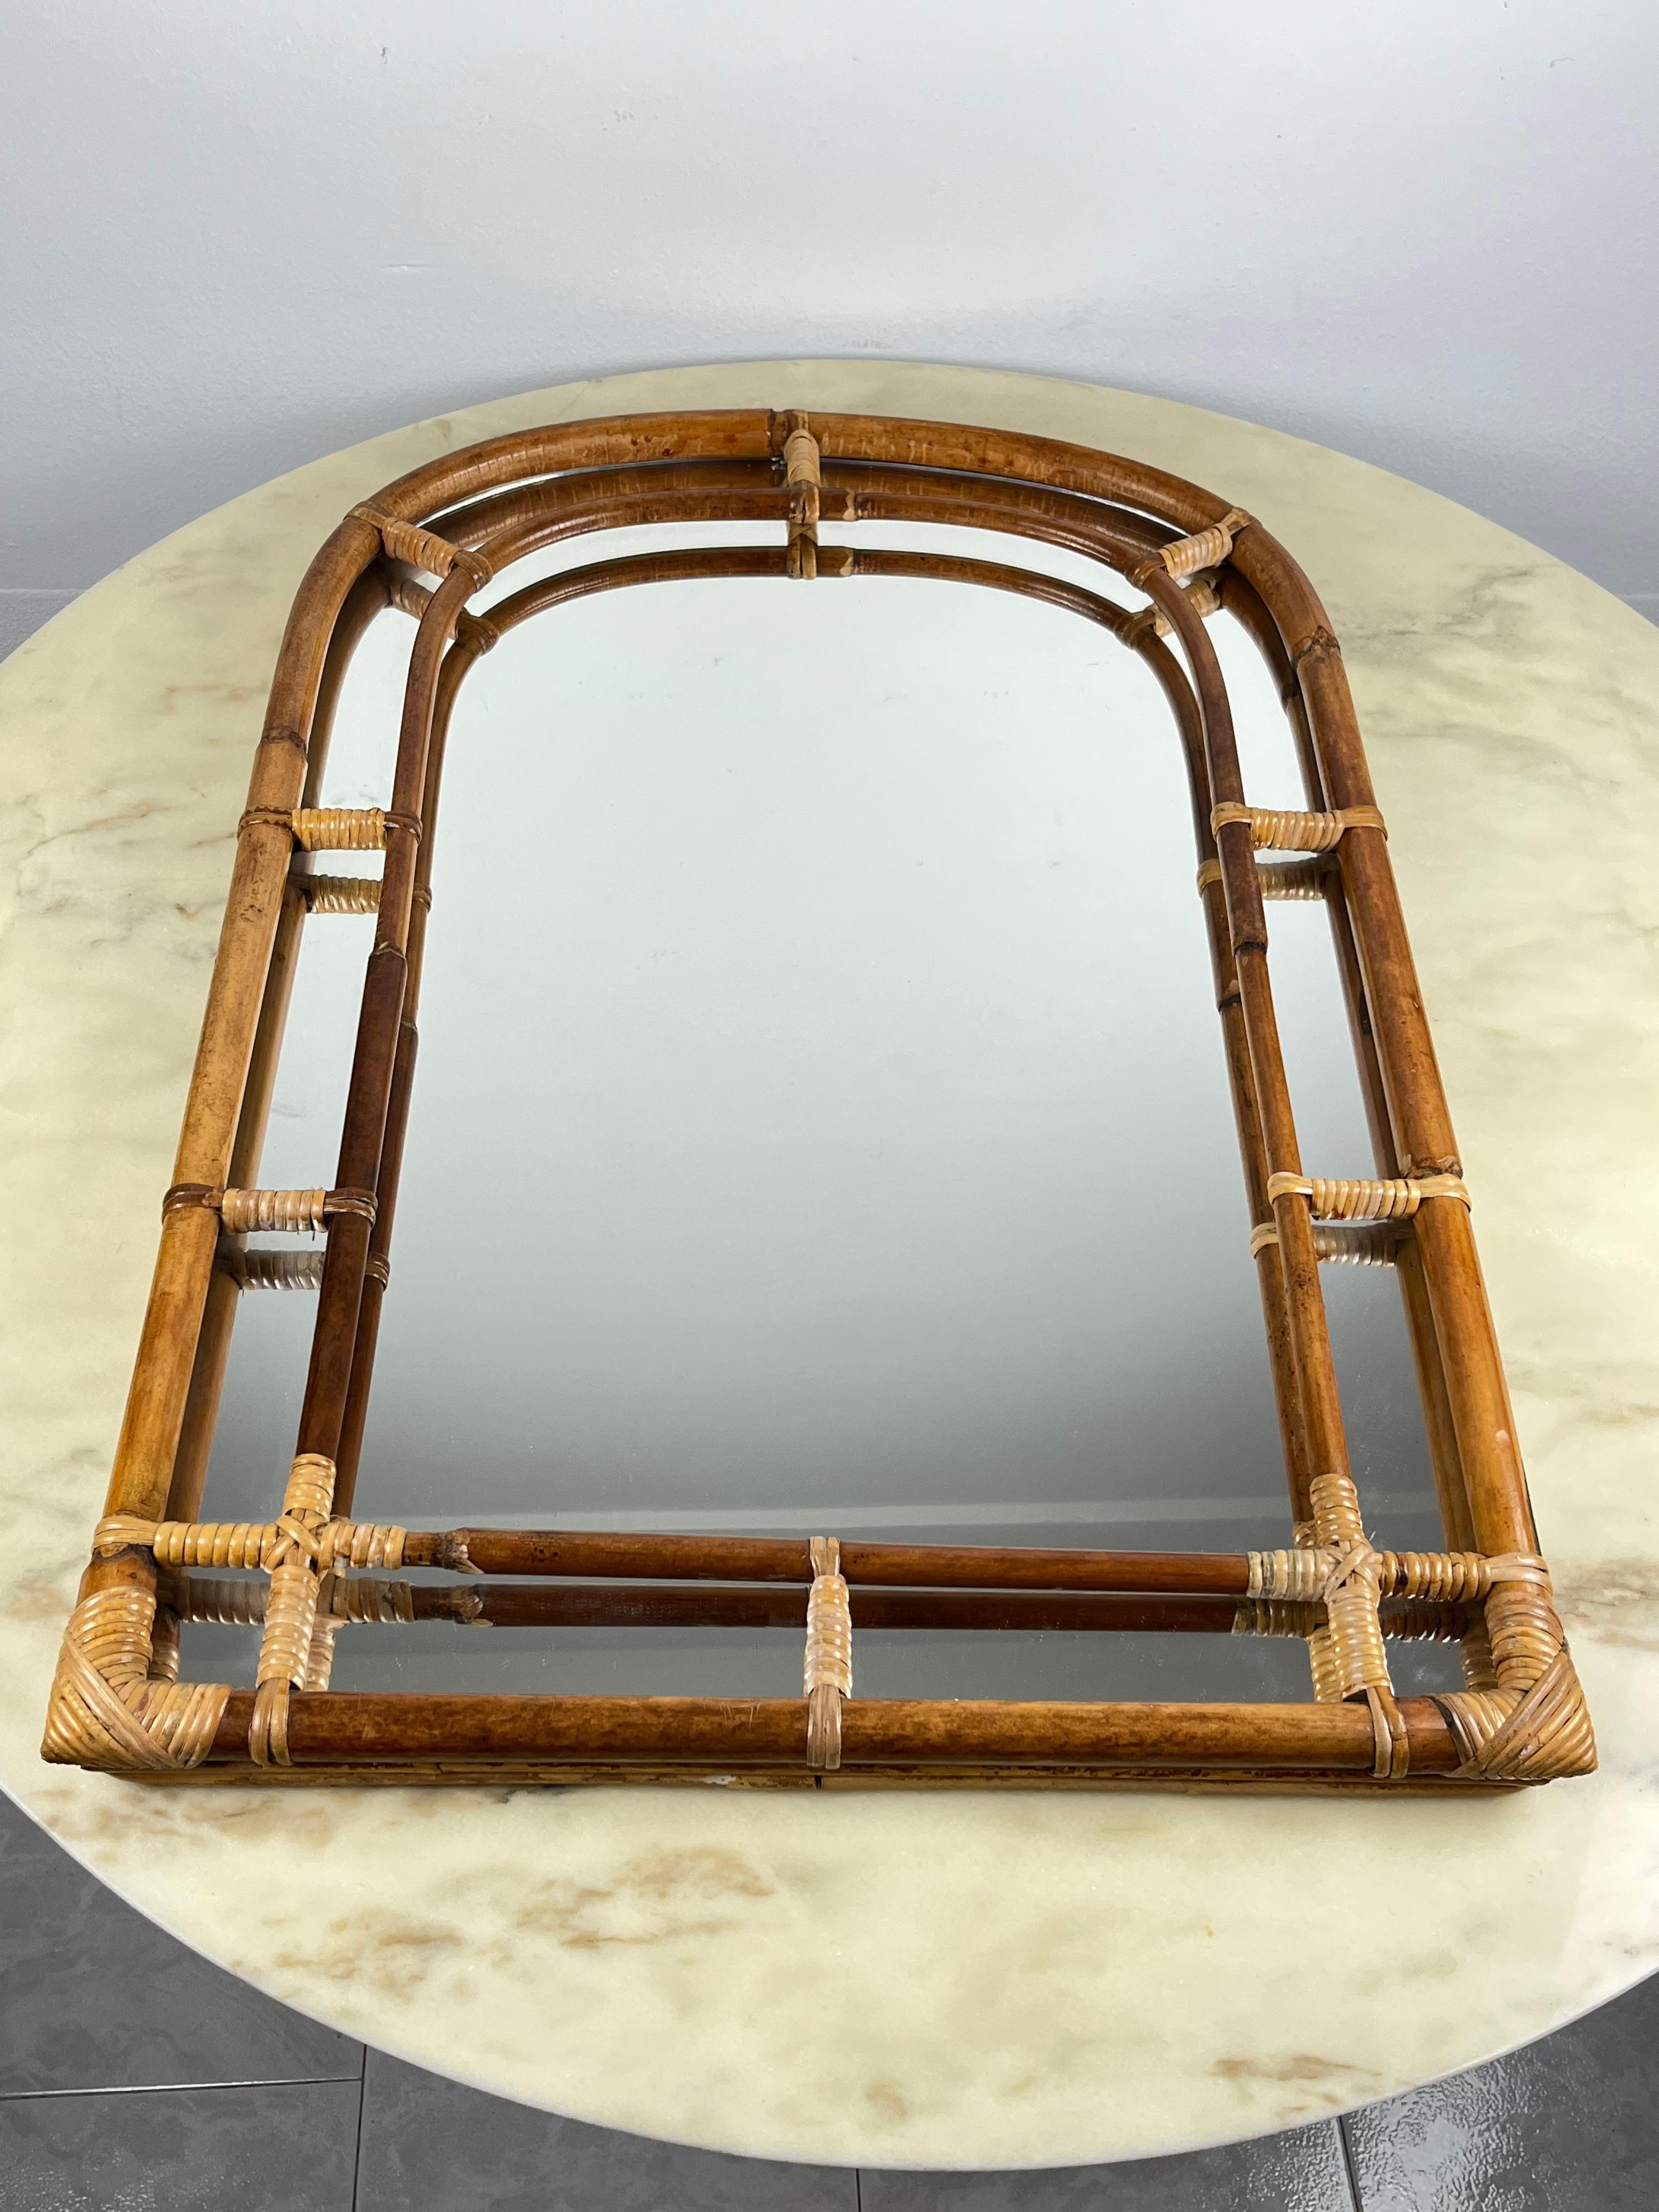 Bamboo wall mirror, attributed to Vittorio Bonacina, 1960s 
Purchased by my grandparents, it was used in the family villa.
It is in excellent condition and shows very small signs of ageing.